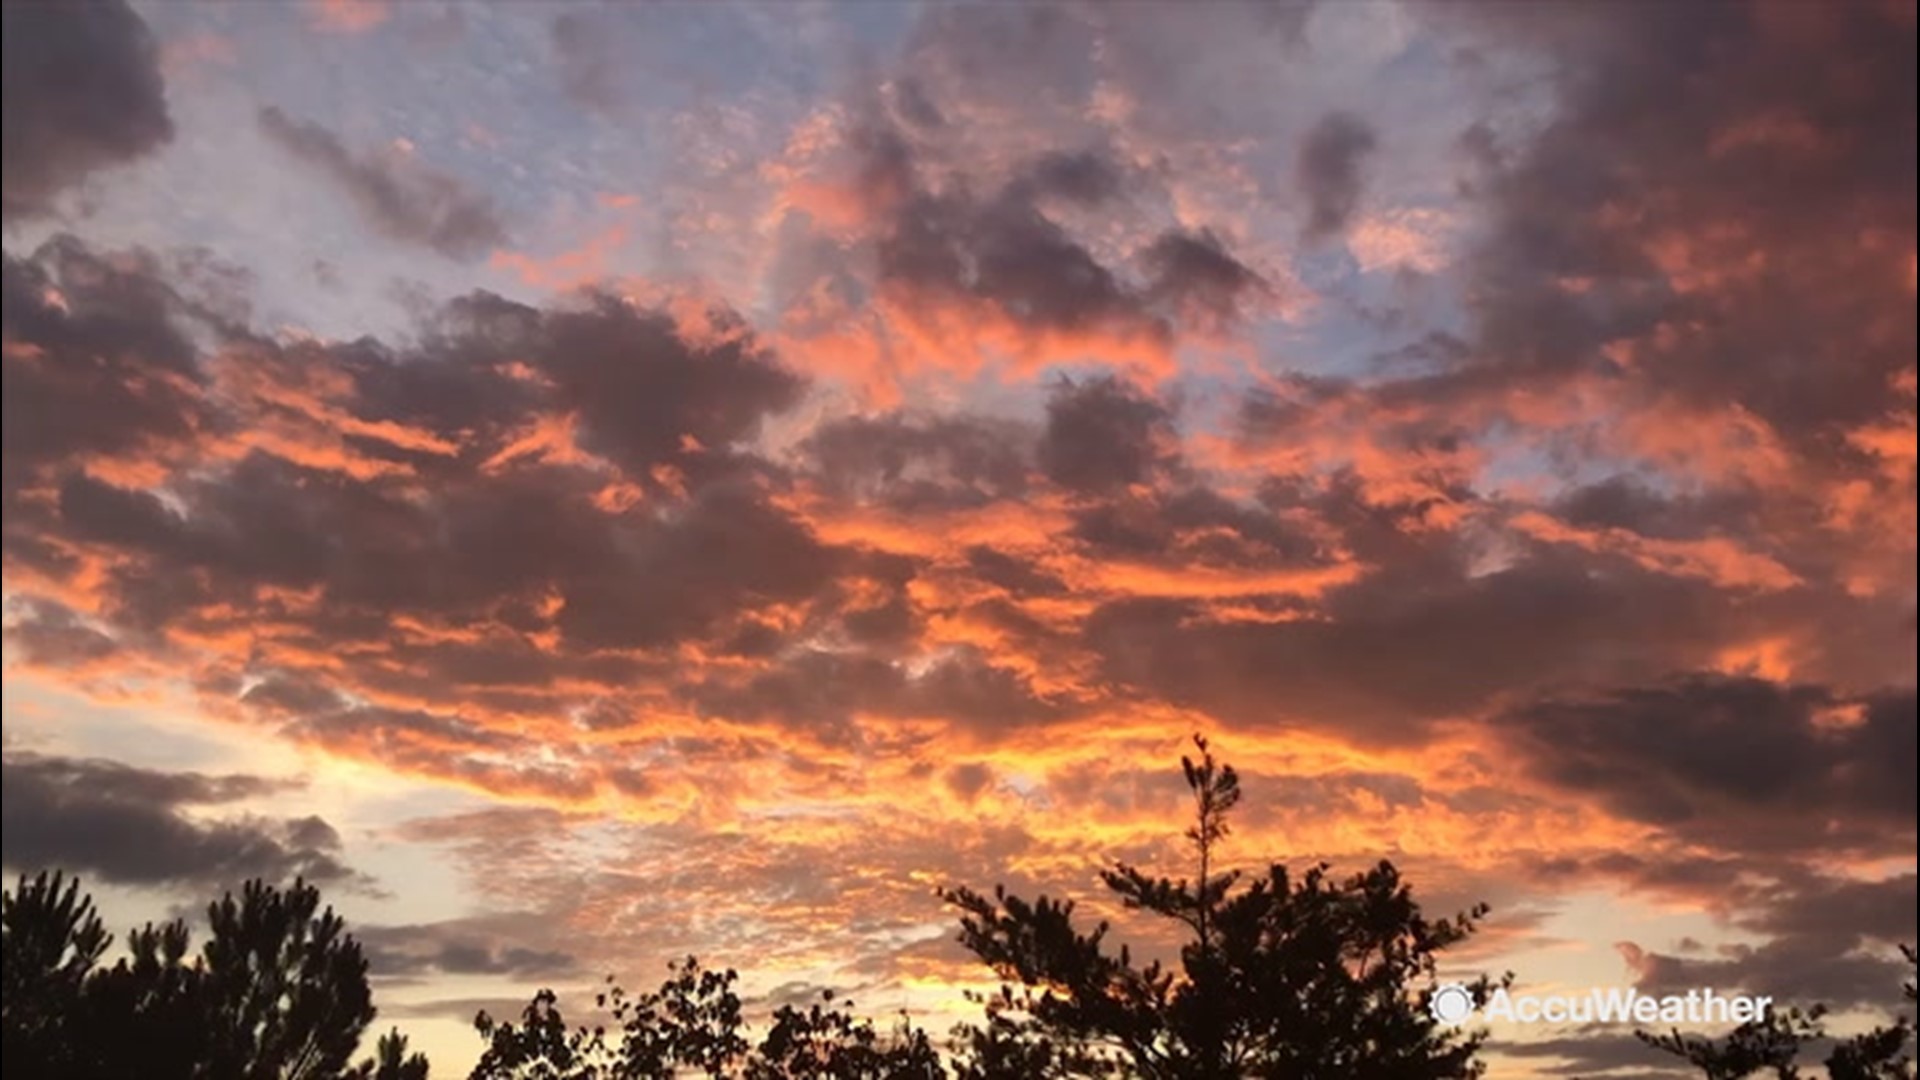 Our AccuWeather friends down in Atlanta, Georgia, caught this beautiful sunset on film on Aug. 14.